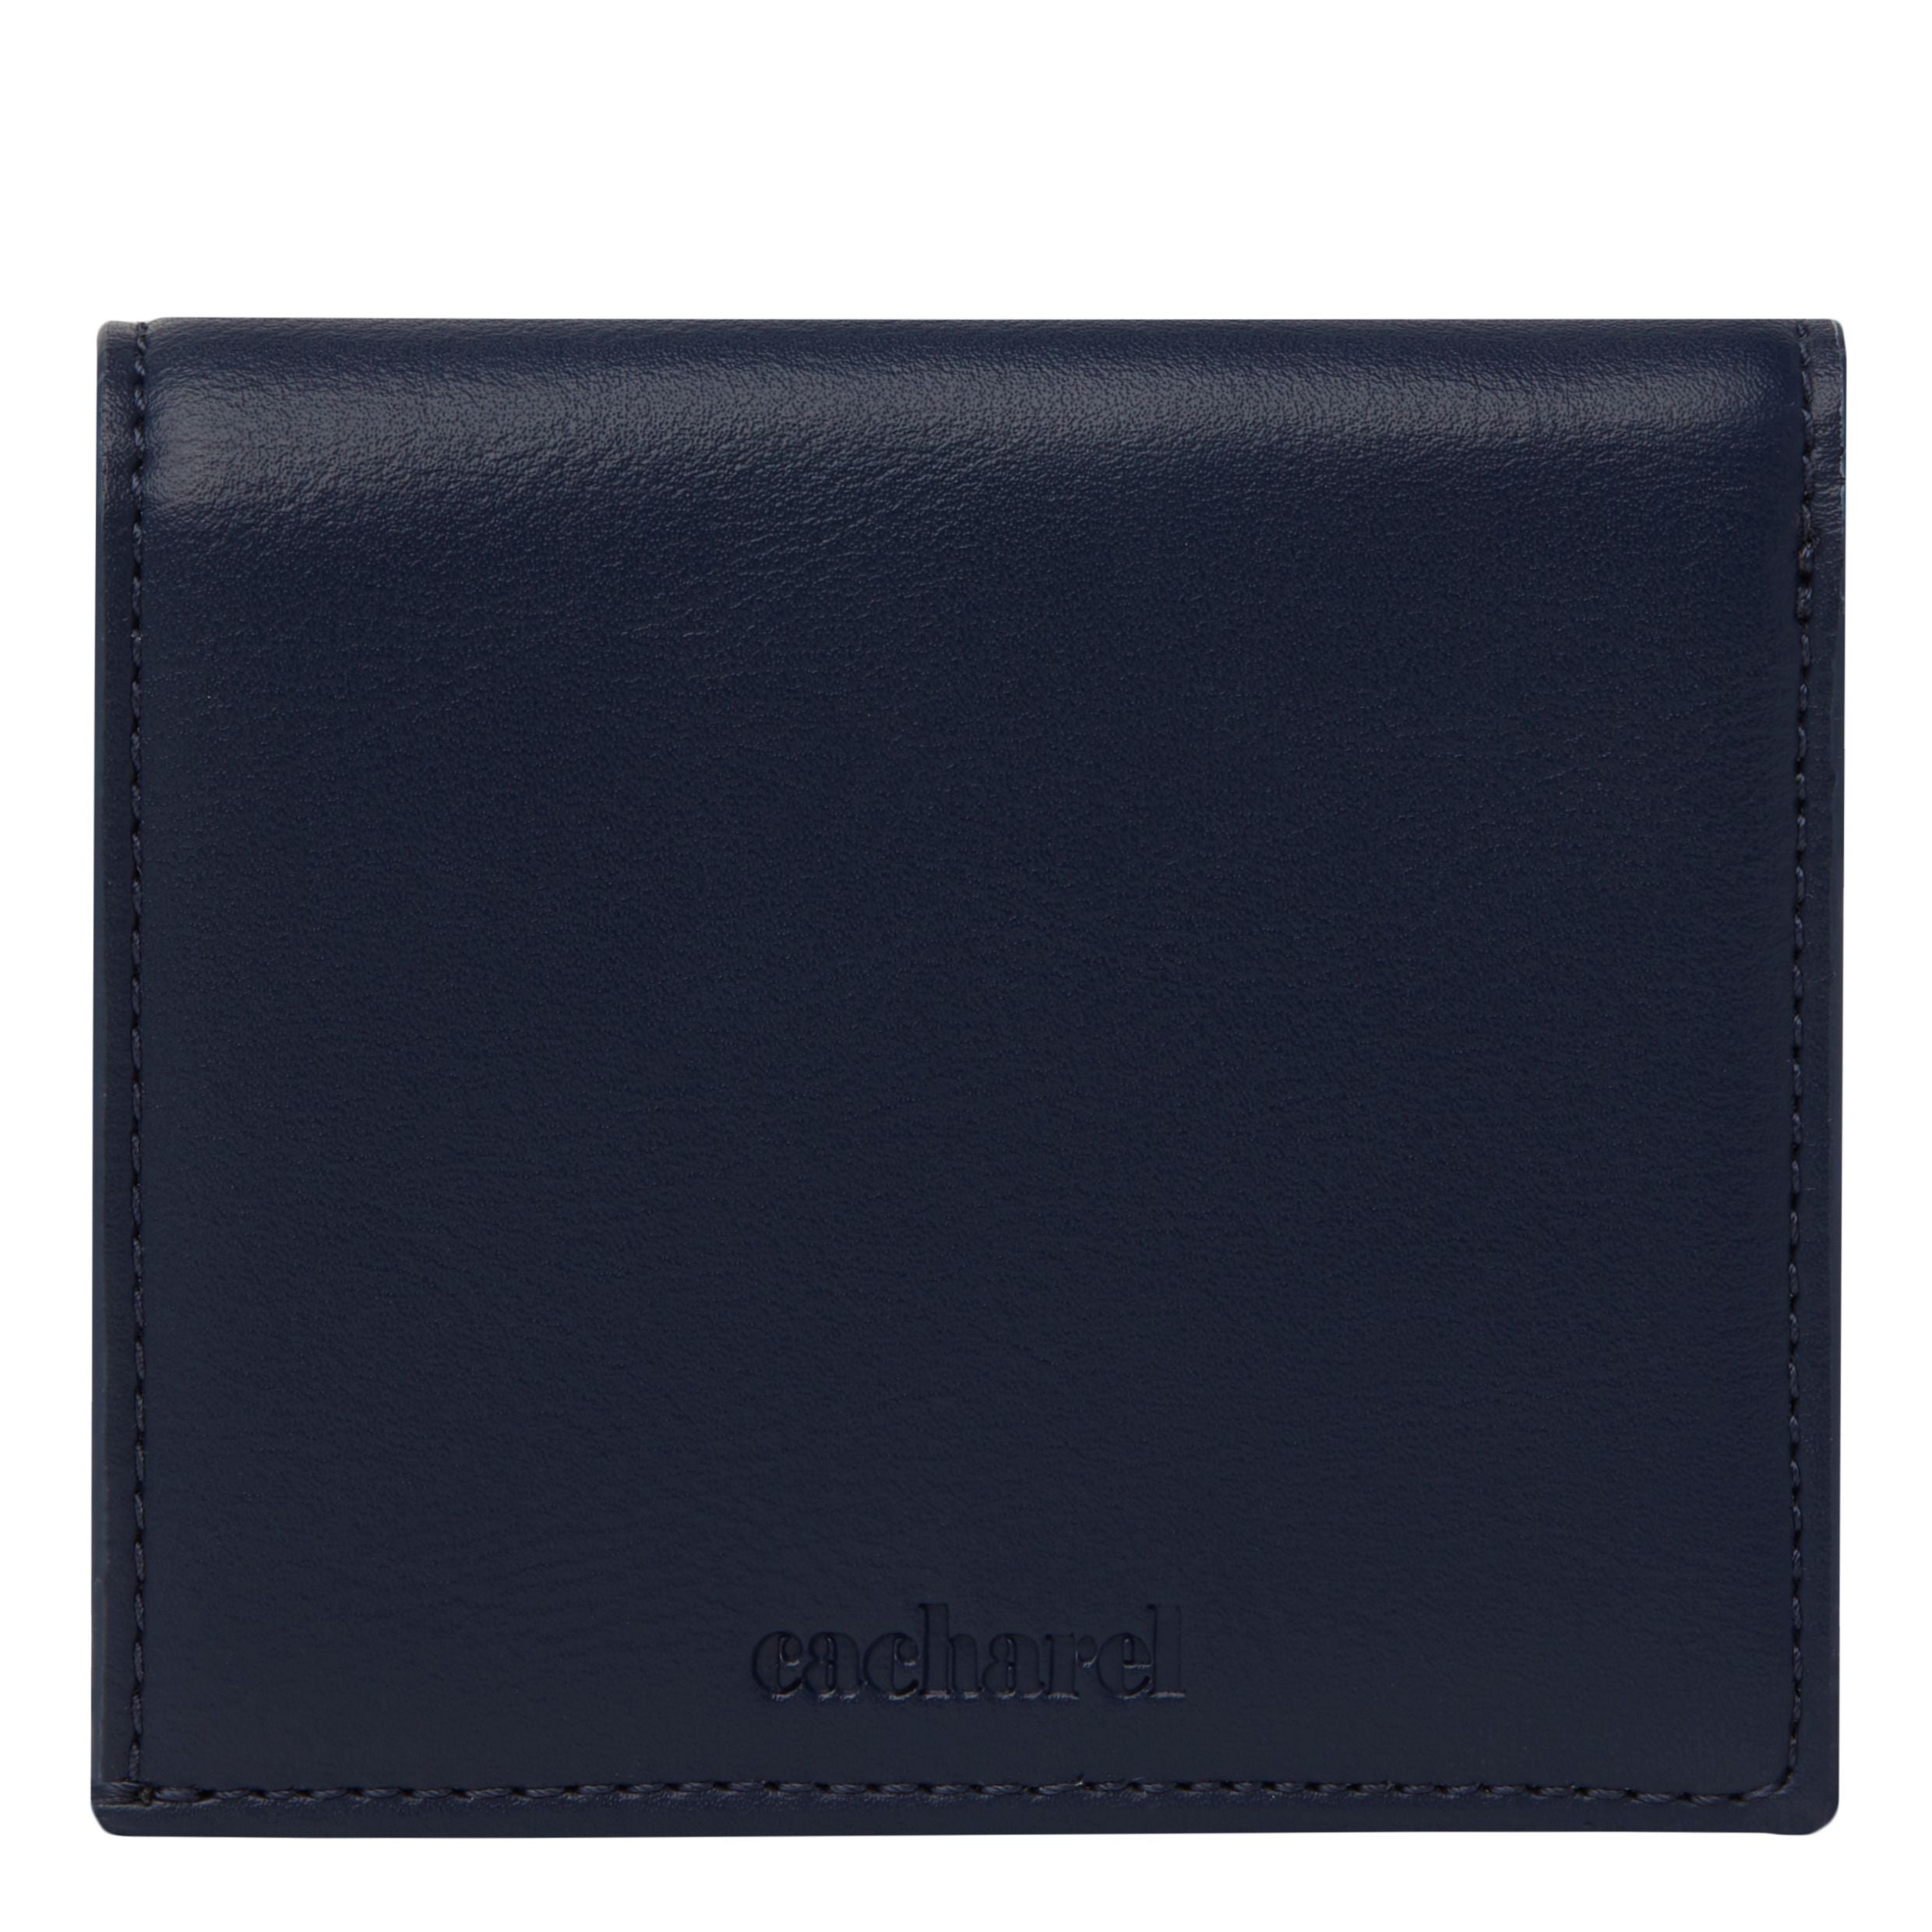 Navy Lady wallet Albane from Cacharel ladies' accessories – Luxury ...